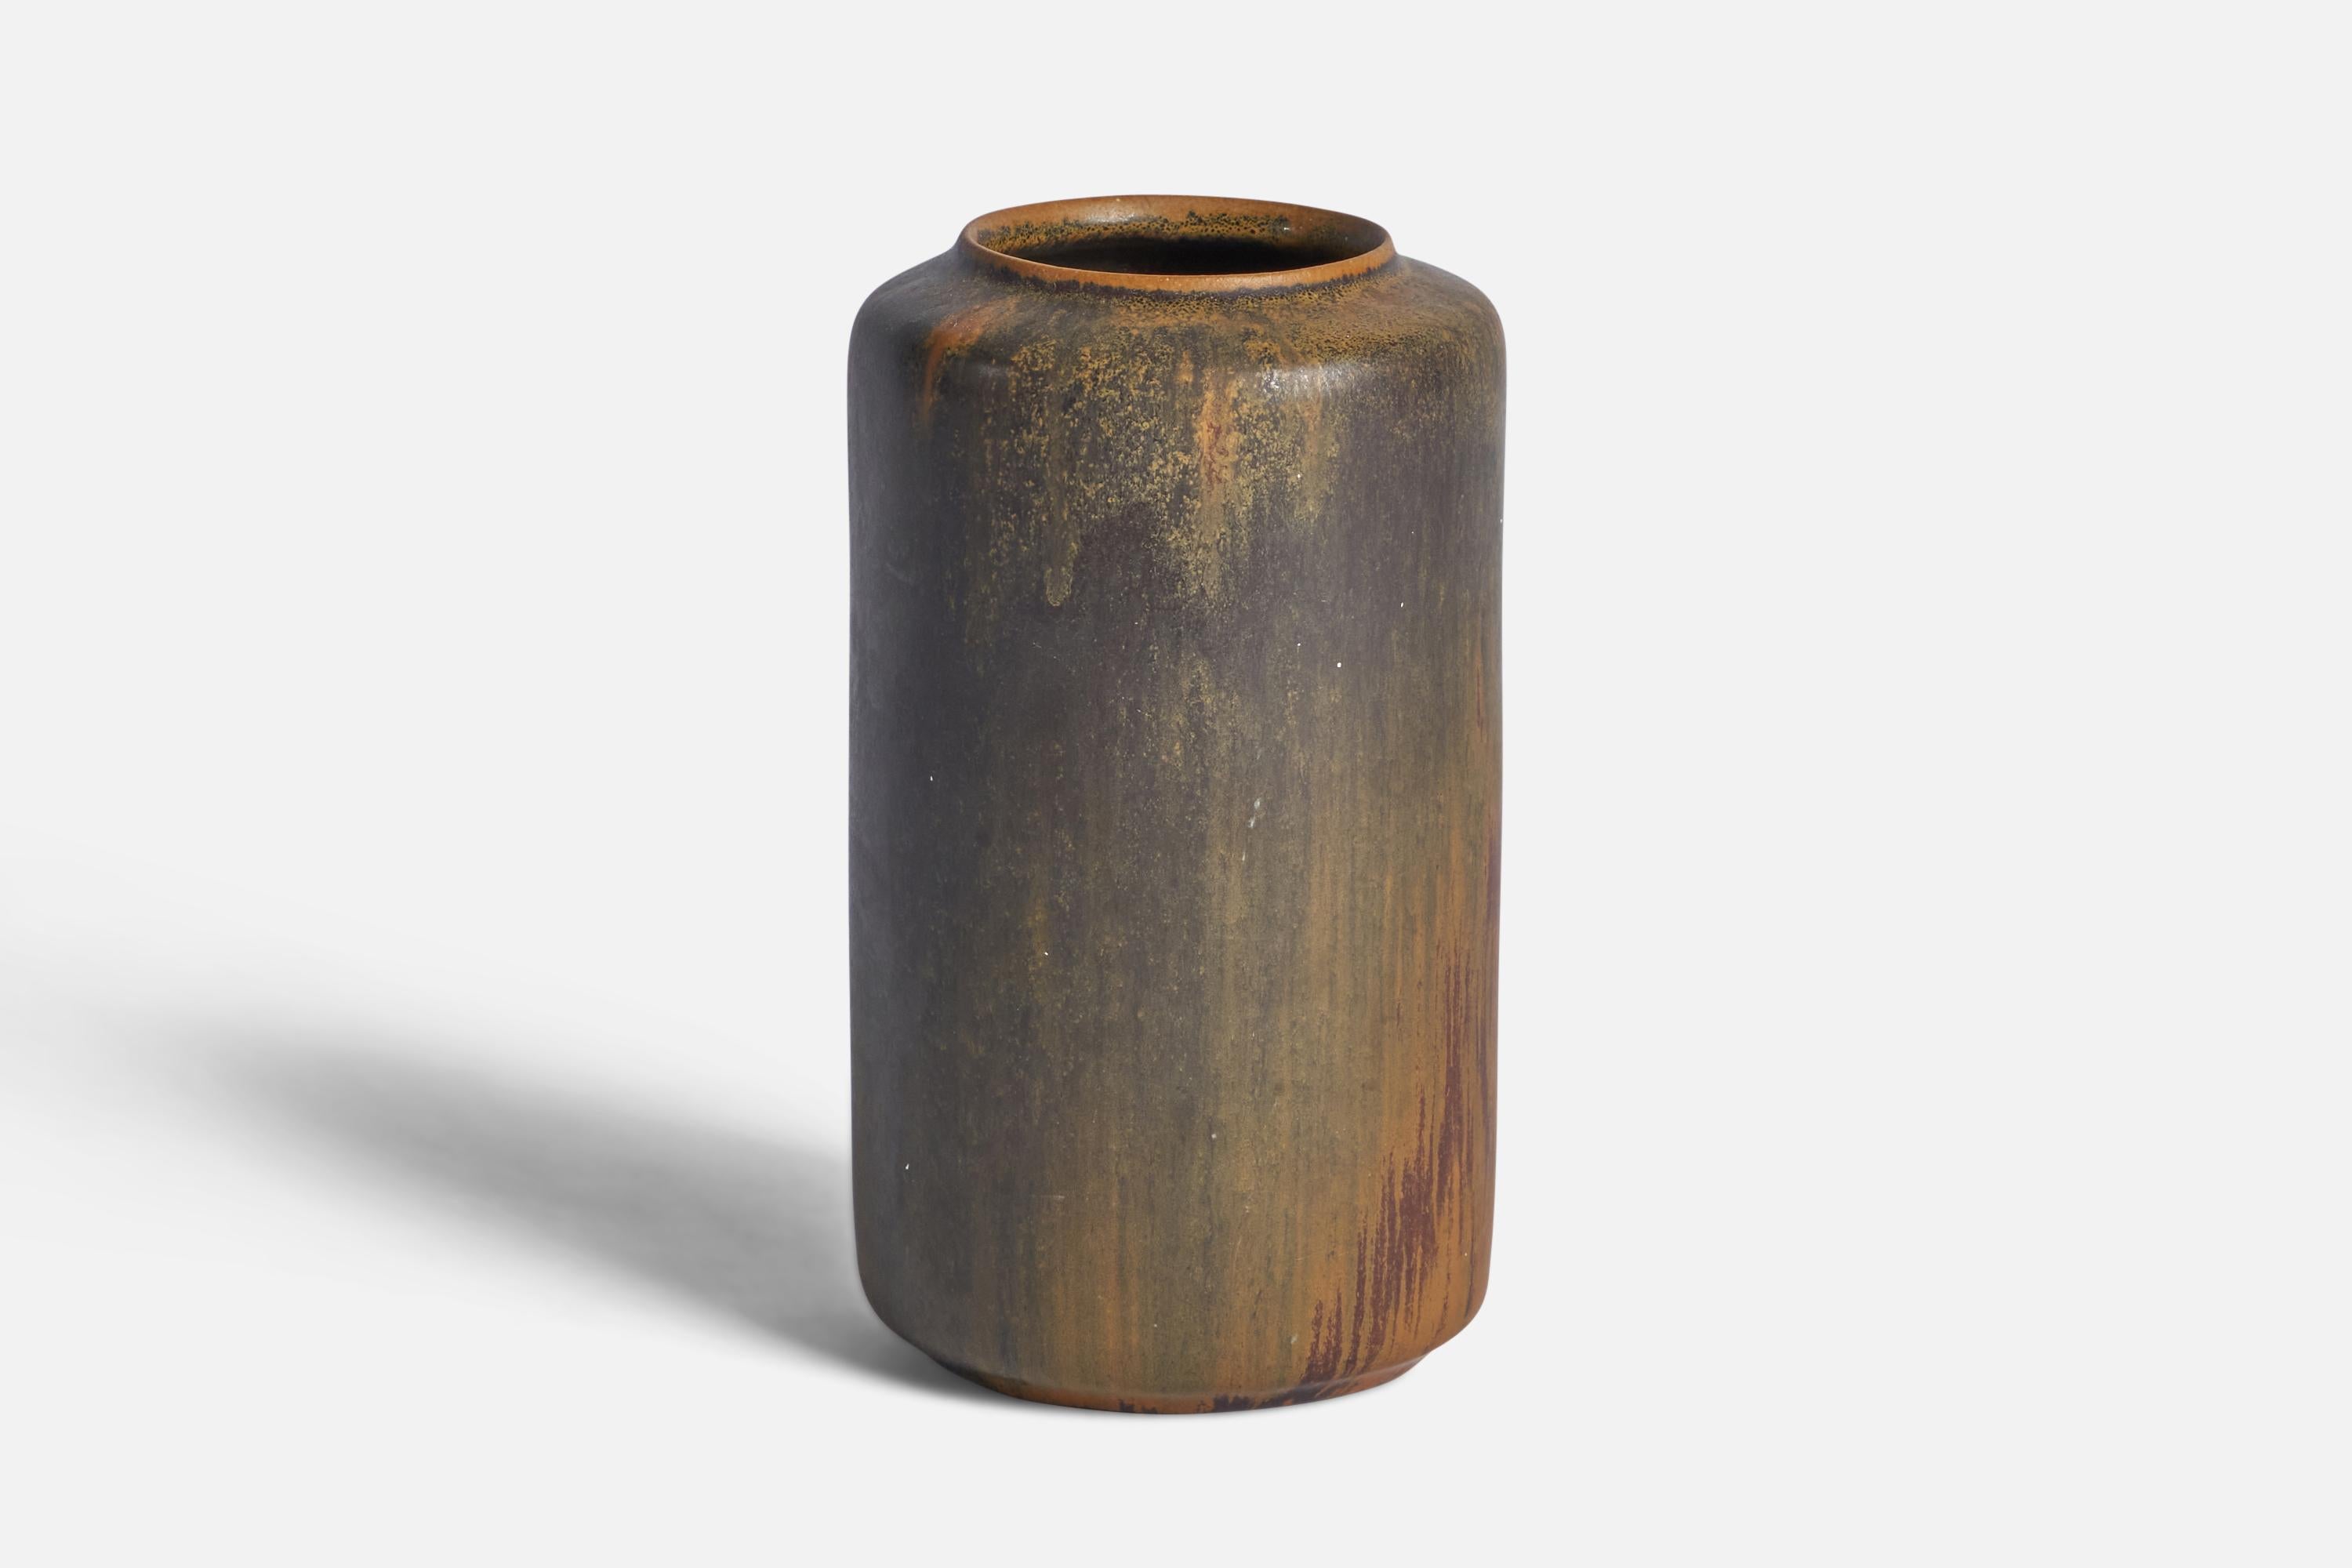 A brown and grey-glazed stoneware vase designed and produced by Ejvind Nielsen, Denmark, c. 1960s.